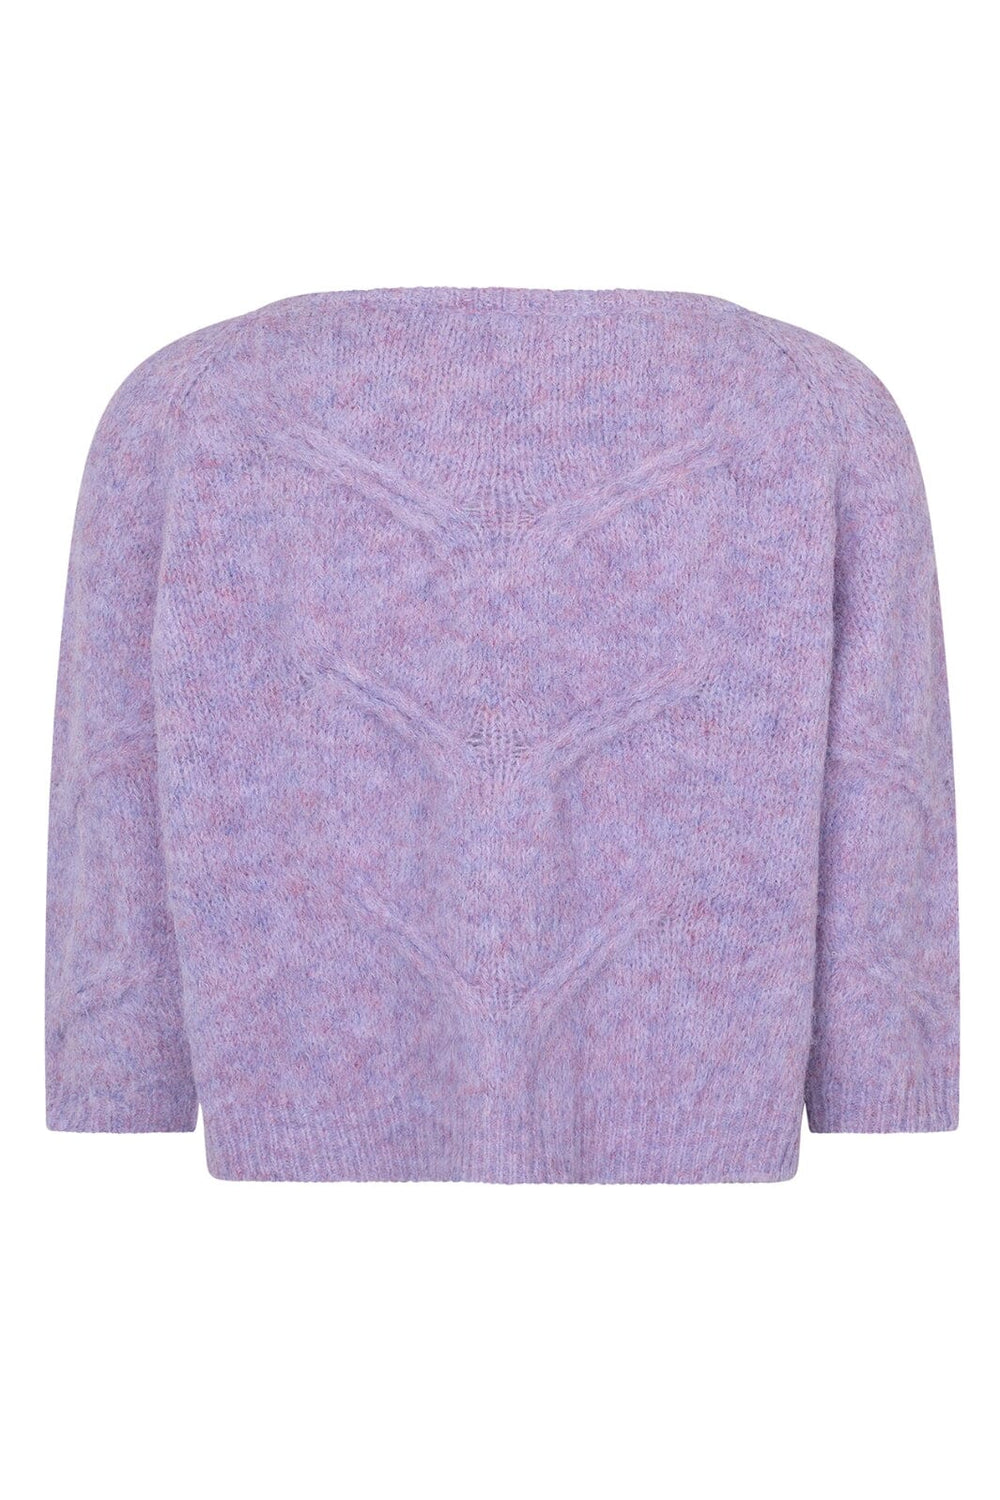 Lollys Laundry - TortugaLL Knit Jumper SS - 53 Lilac Strikbluser 